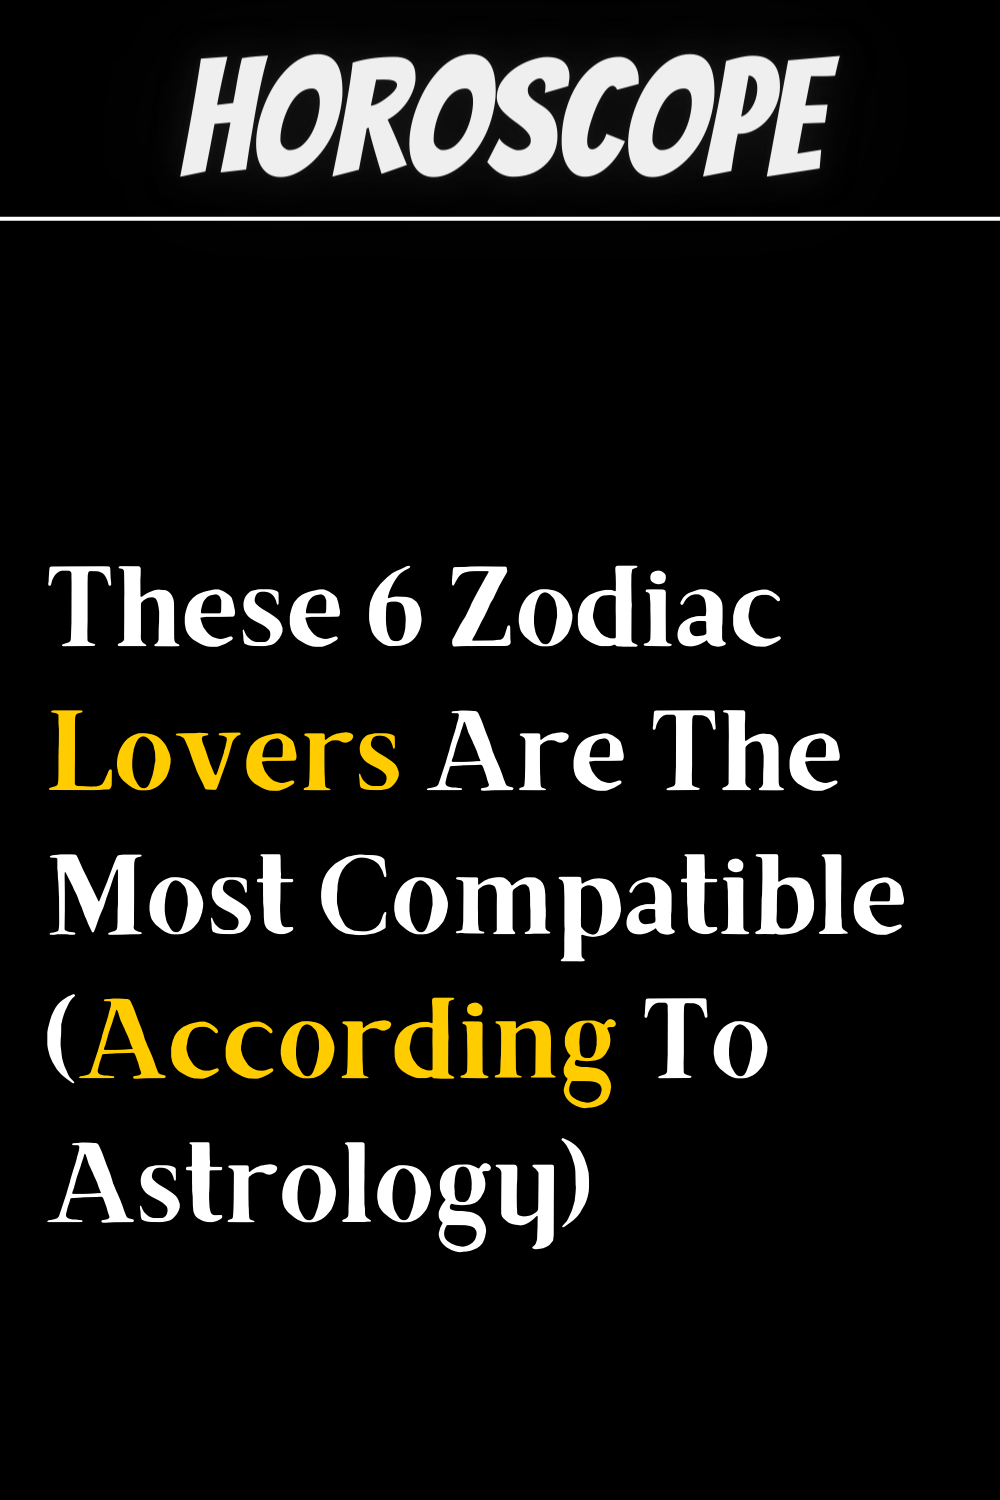 These 6 Zodiac Lovers Are The Most Compatible (According To Astrology)